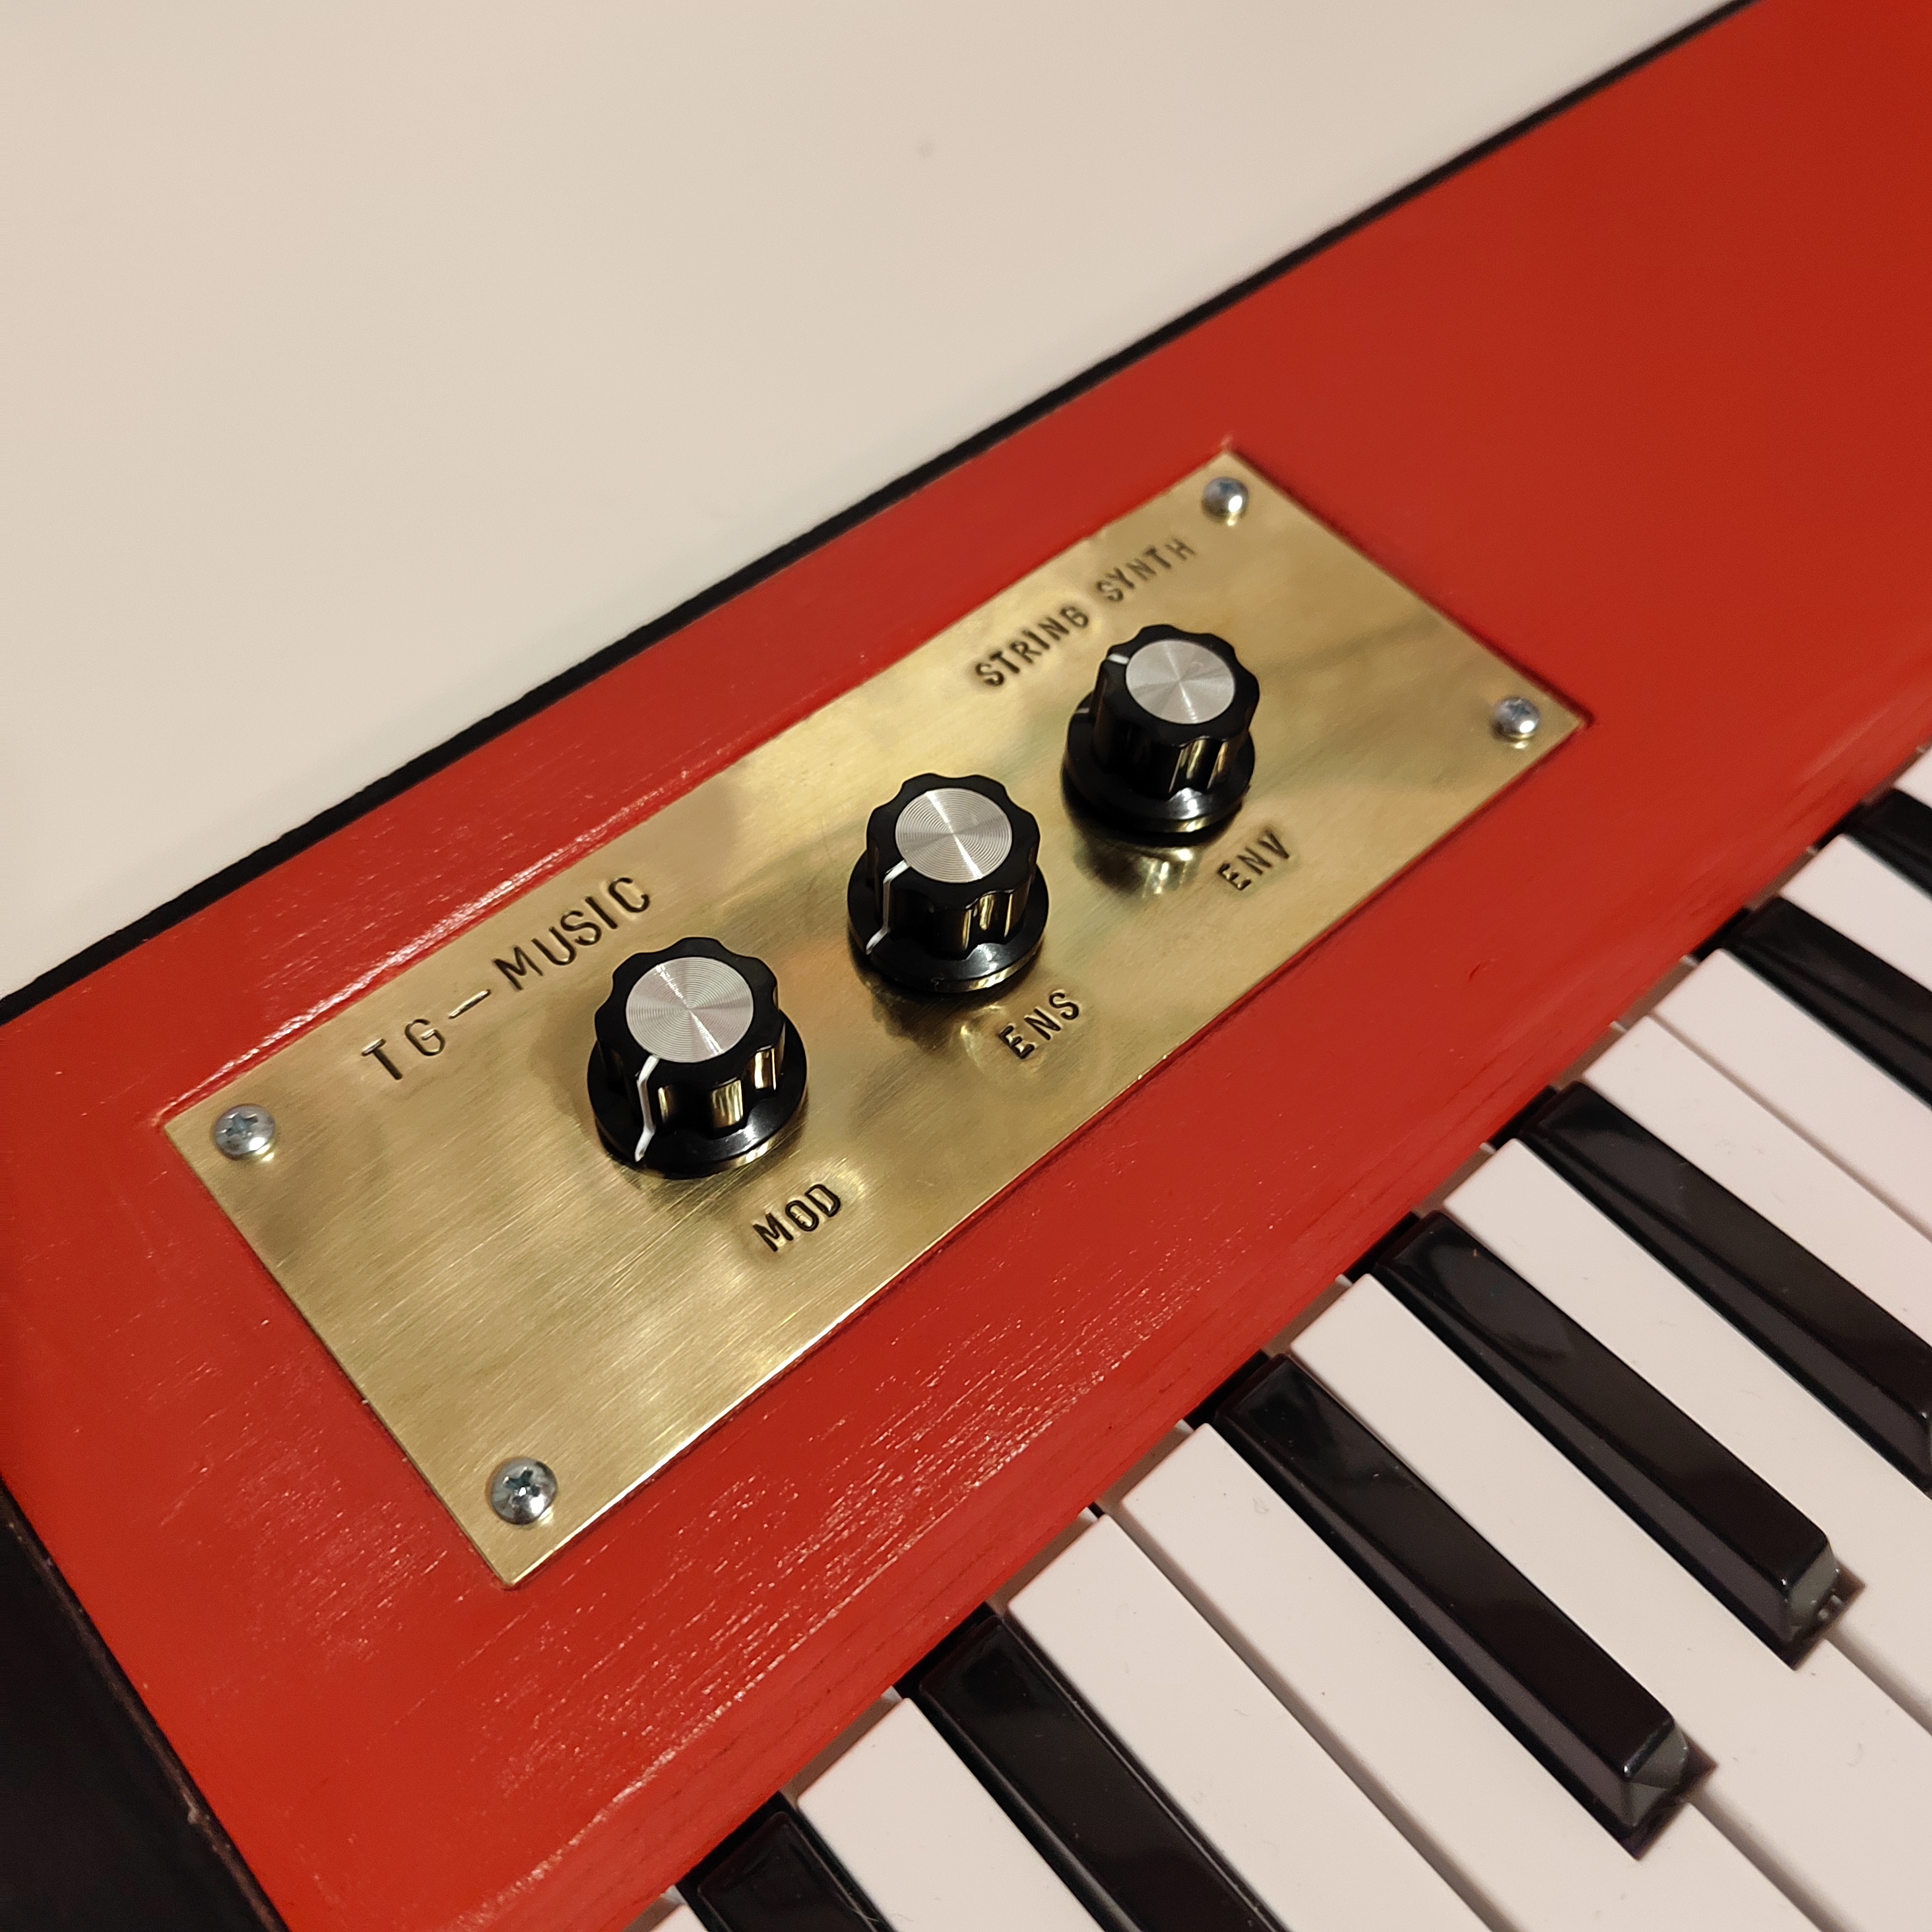 tg-music String Synth